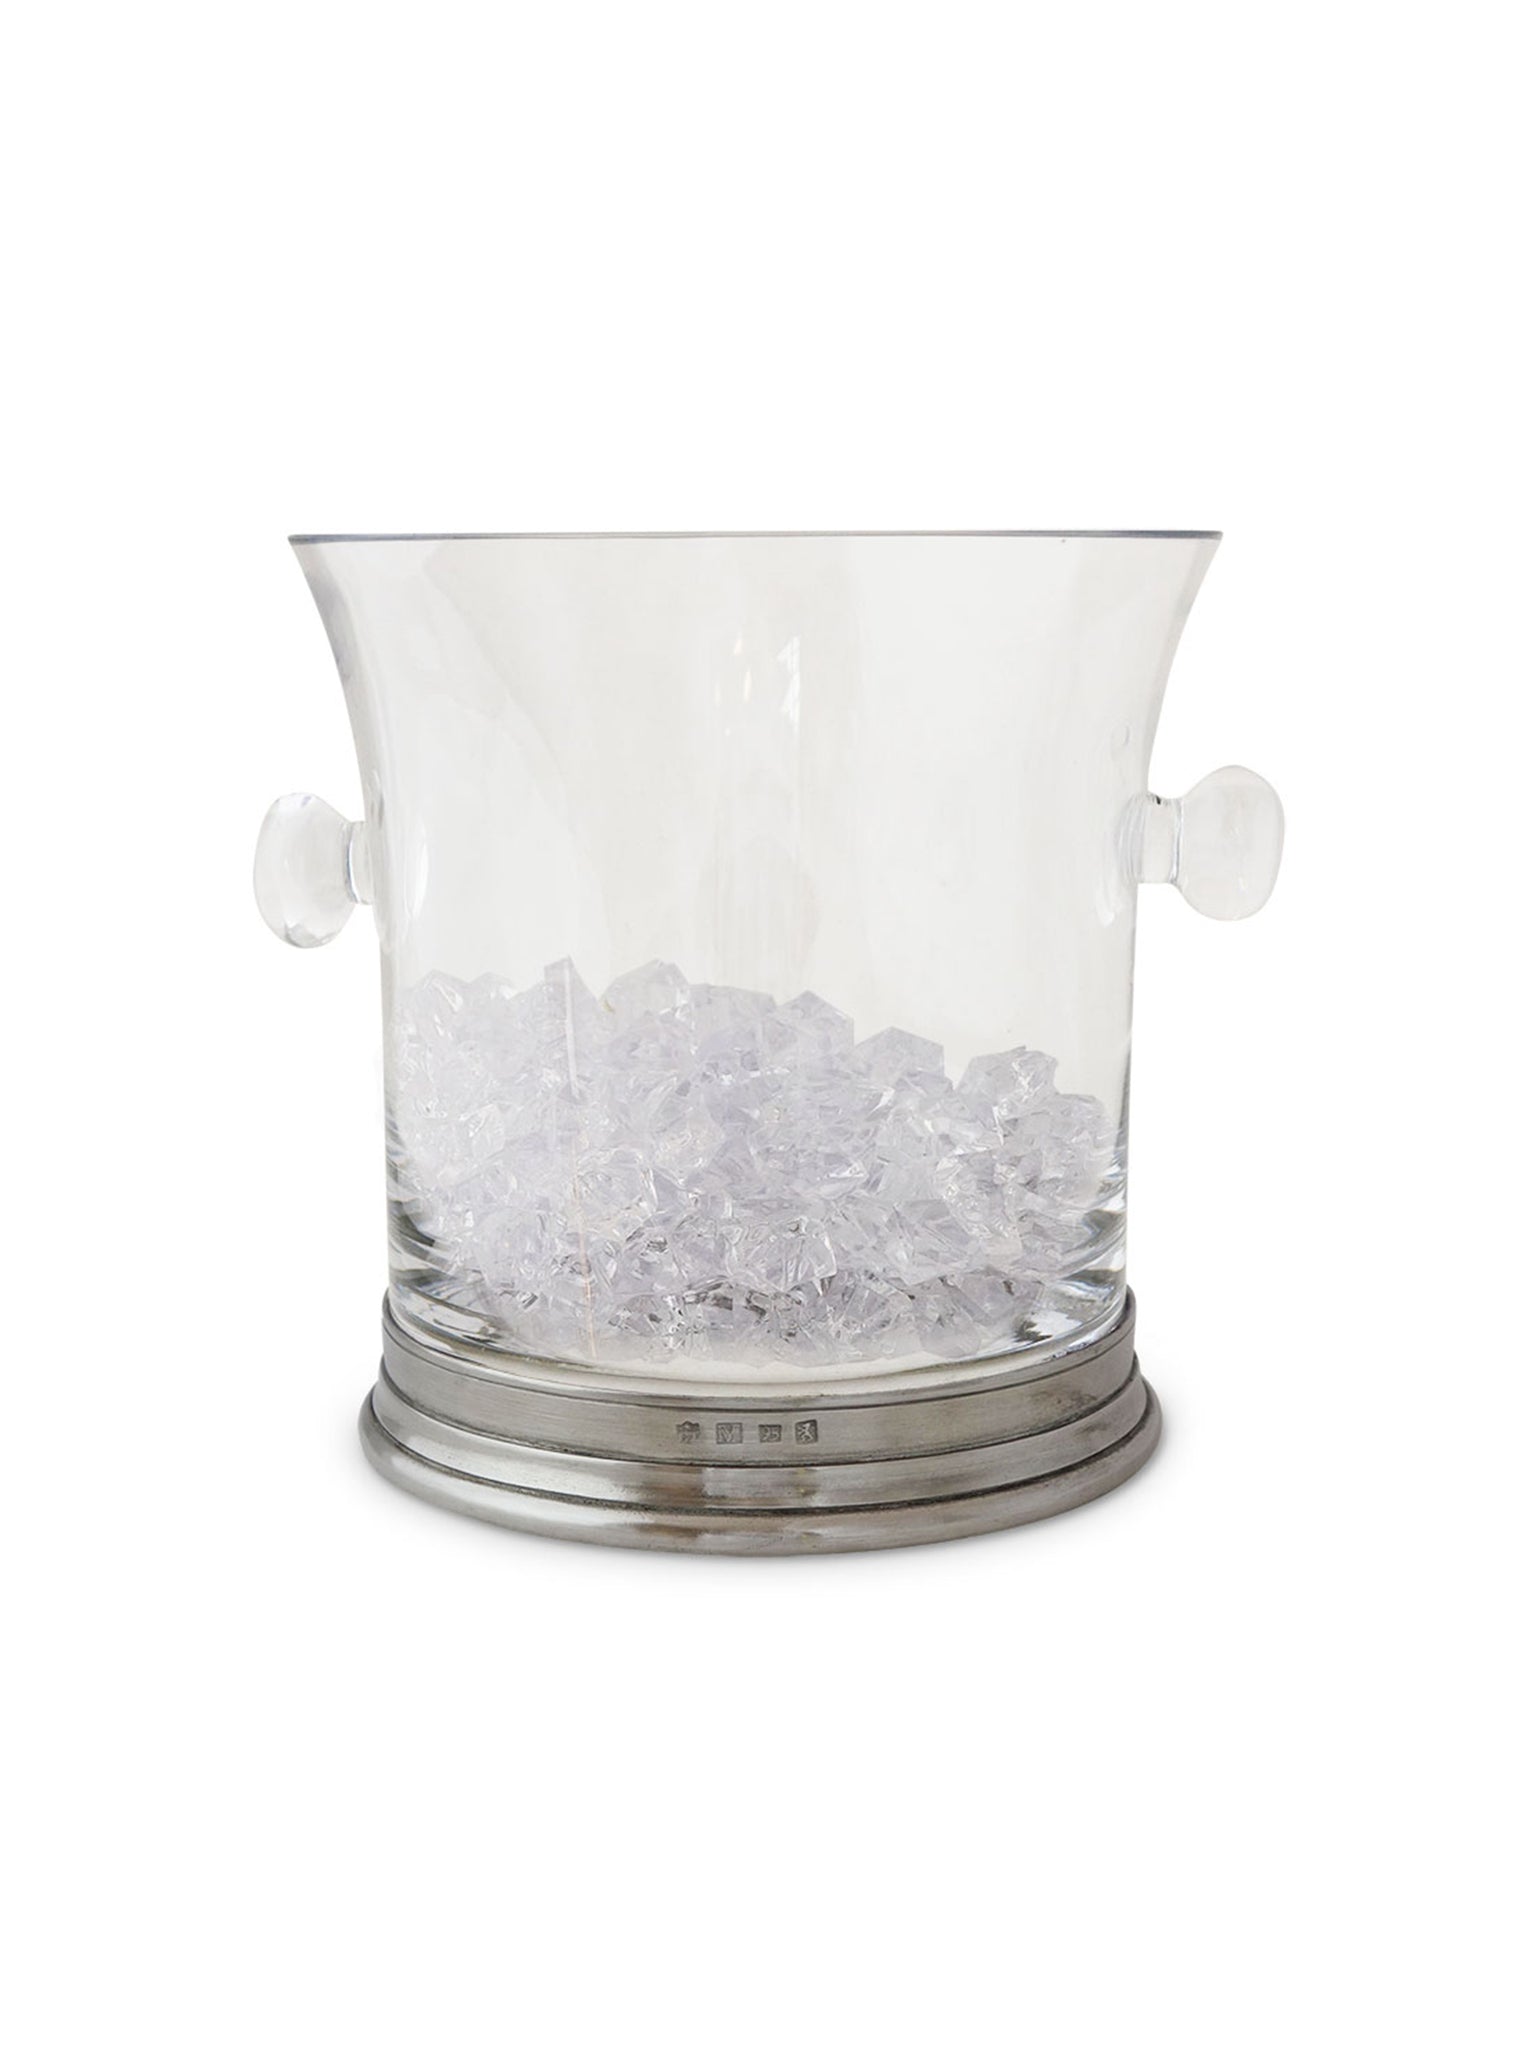 MATCH Pewter Crystal Ice Bucket with Handles Weston Table